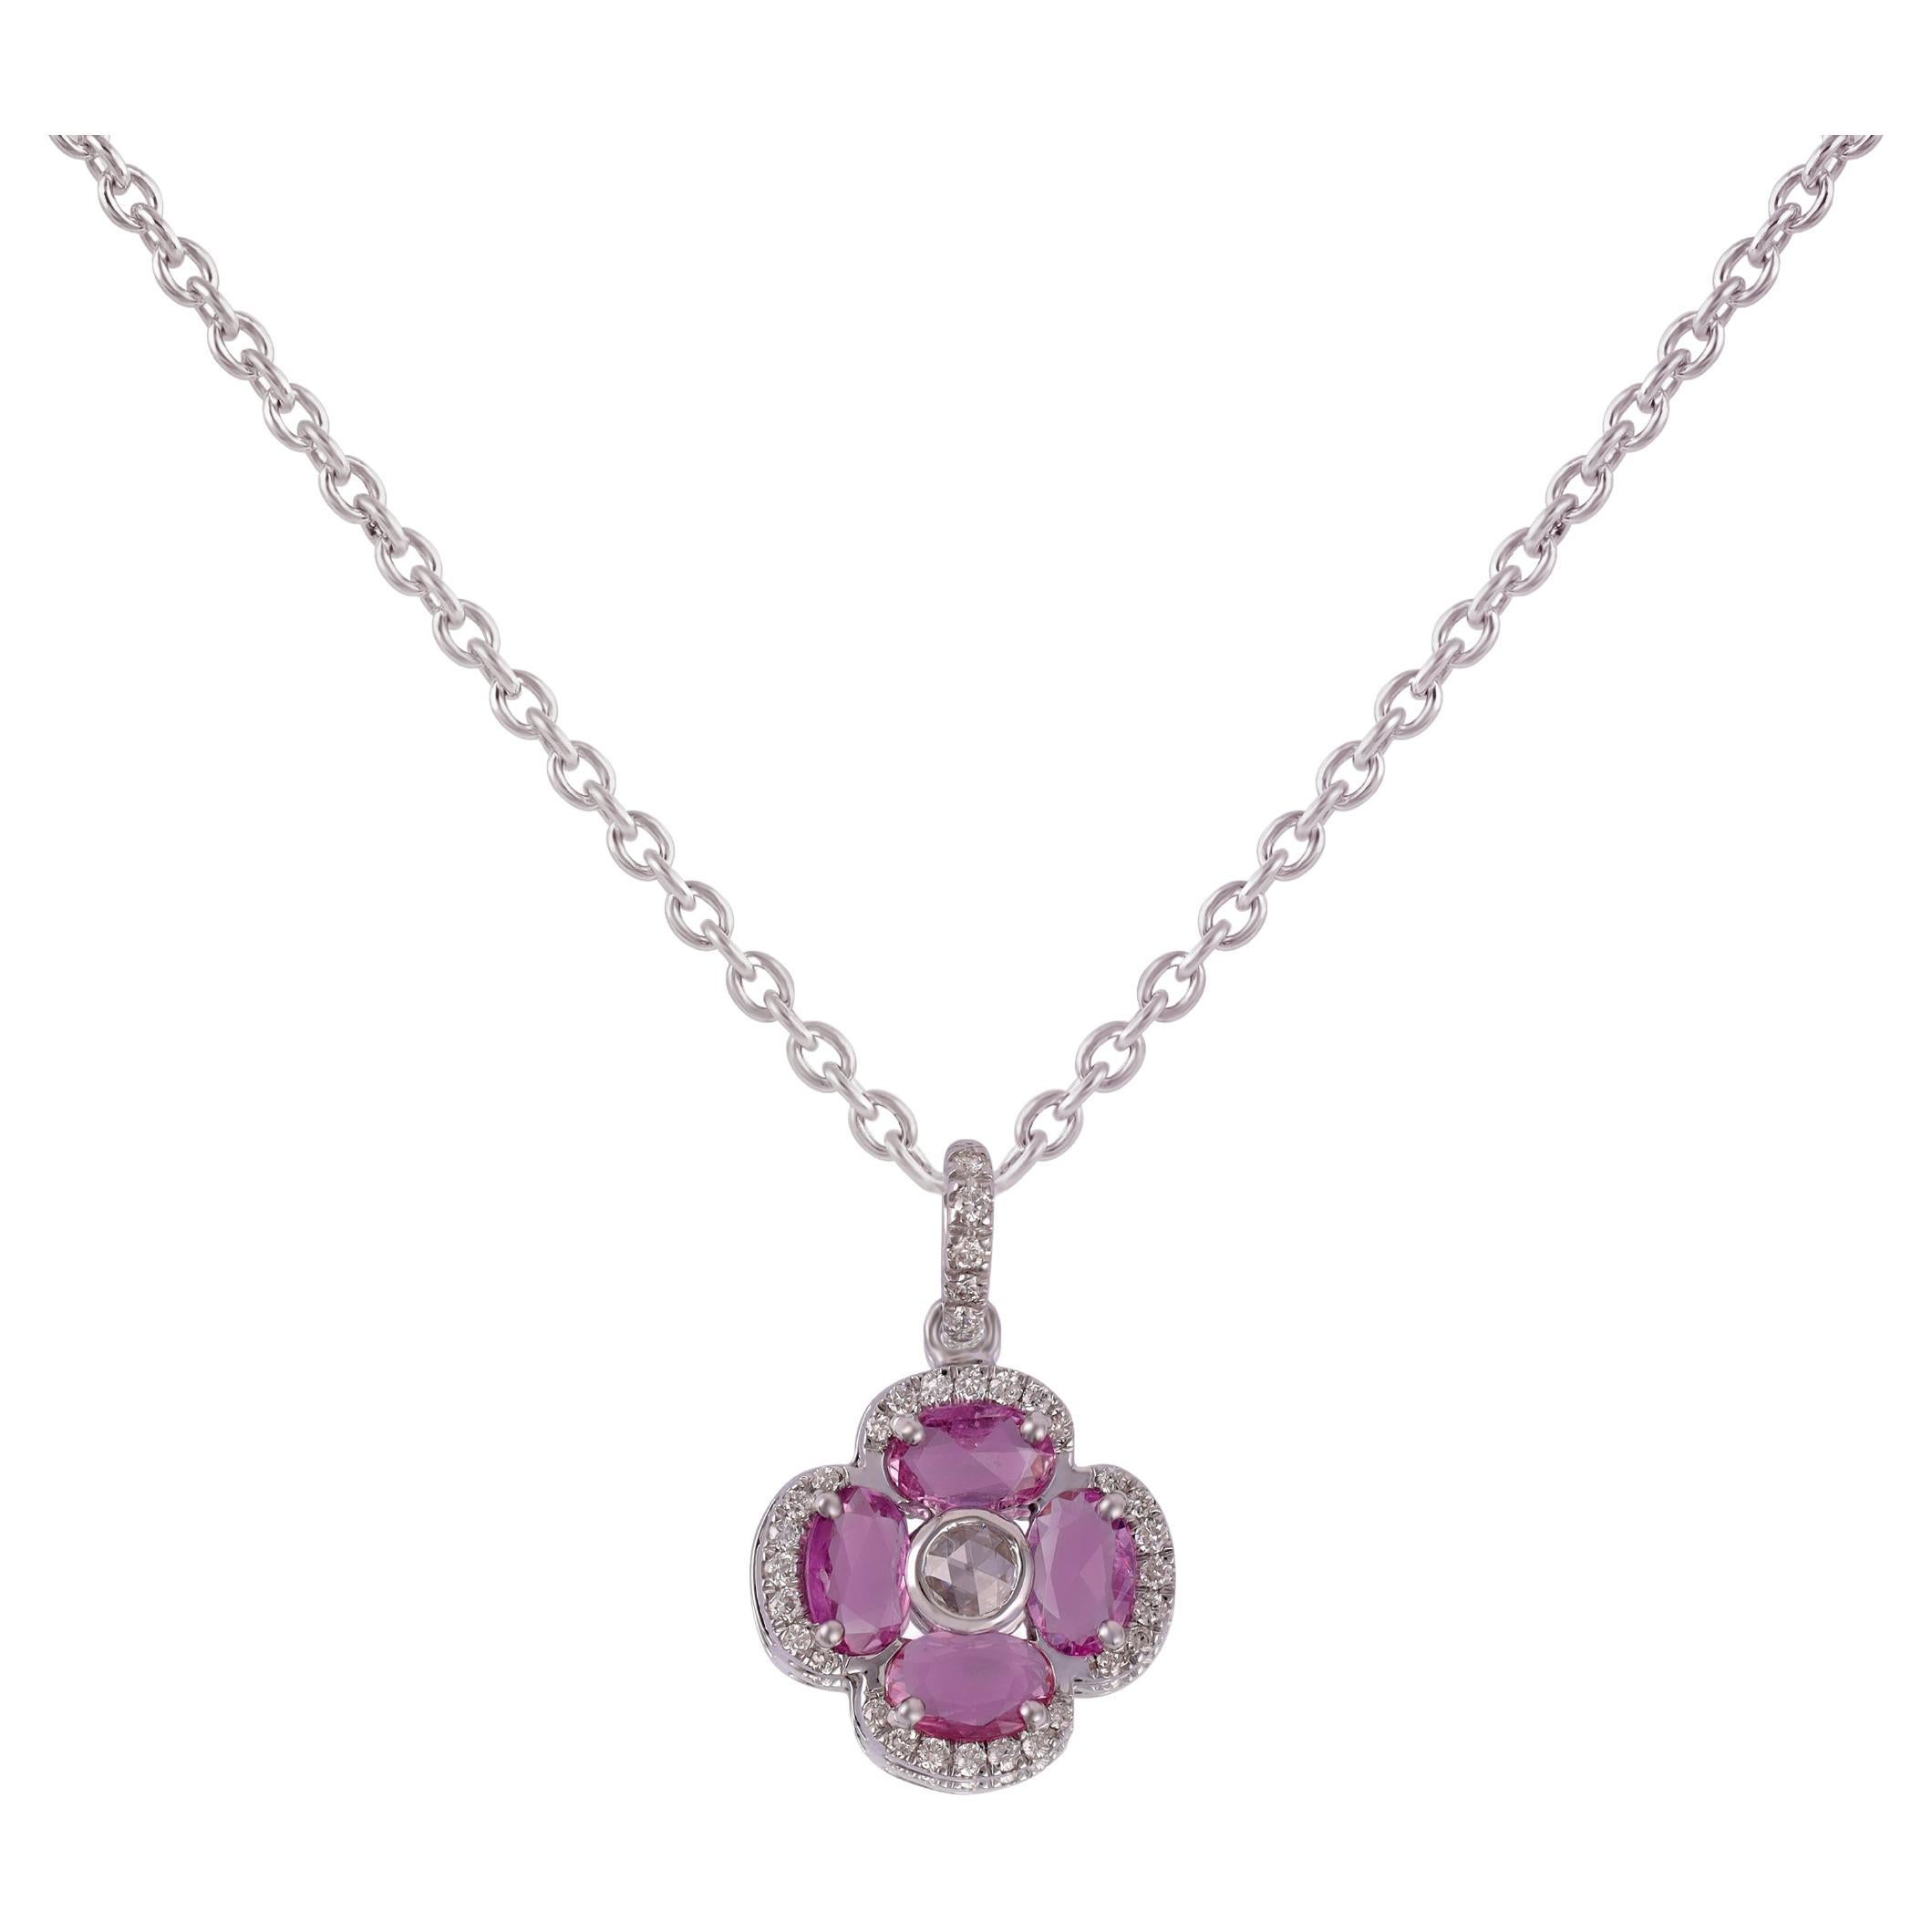 1.37 Carat Oval Cut Pink Sapphire Pendant Necklace in 18 Karat Gold with Diamond For Sale